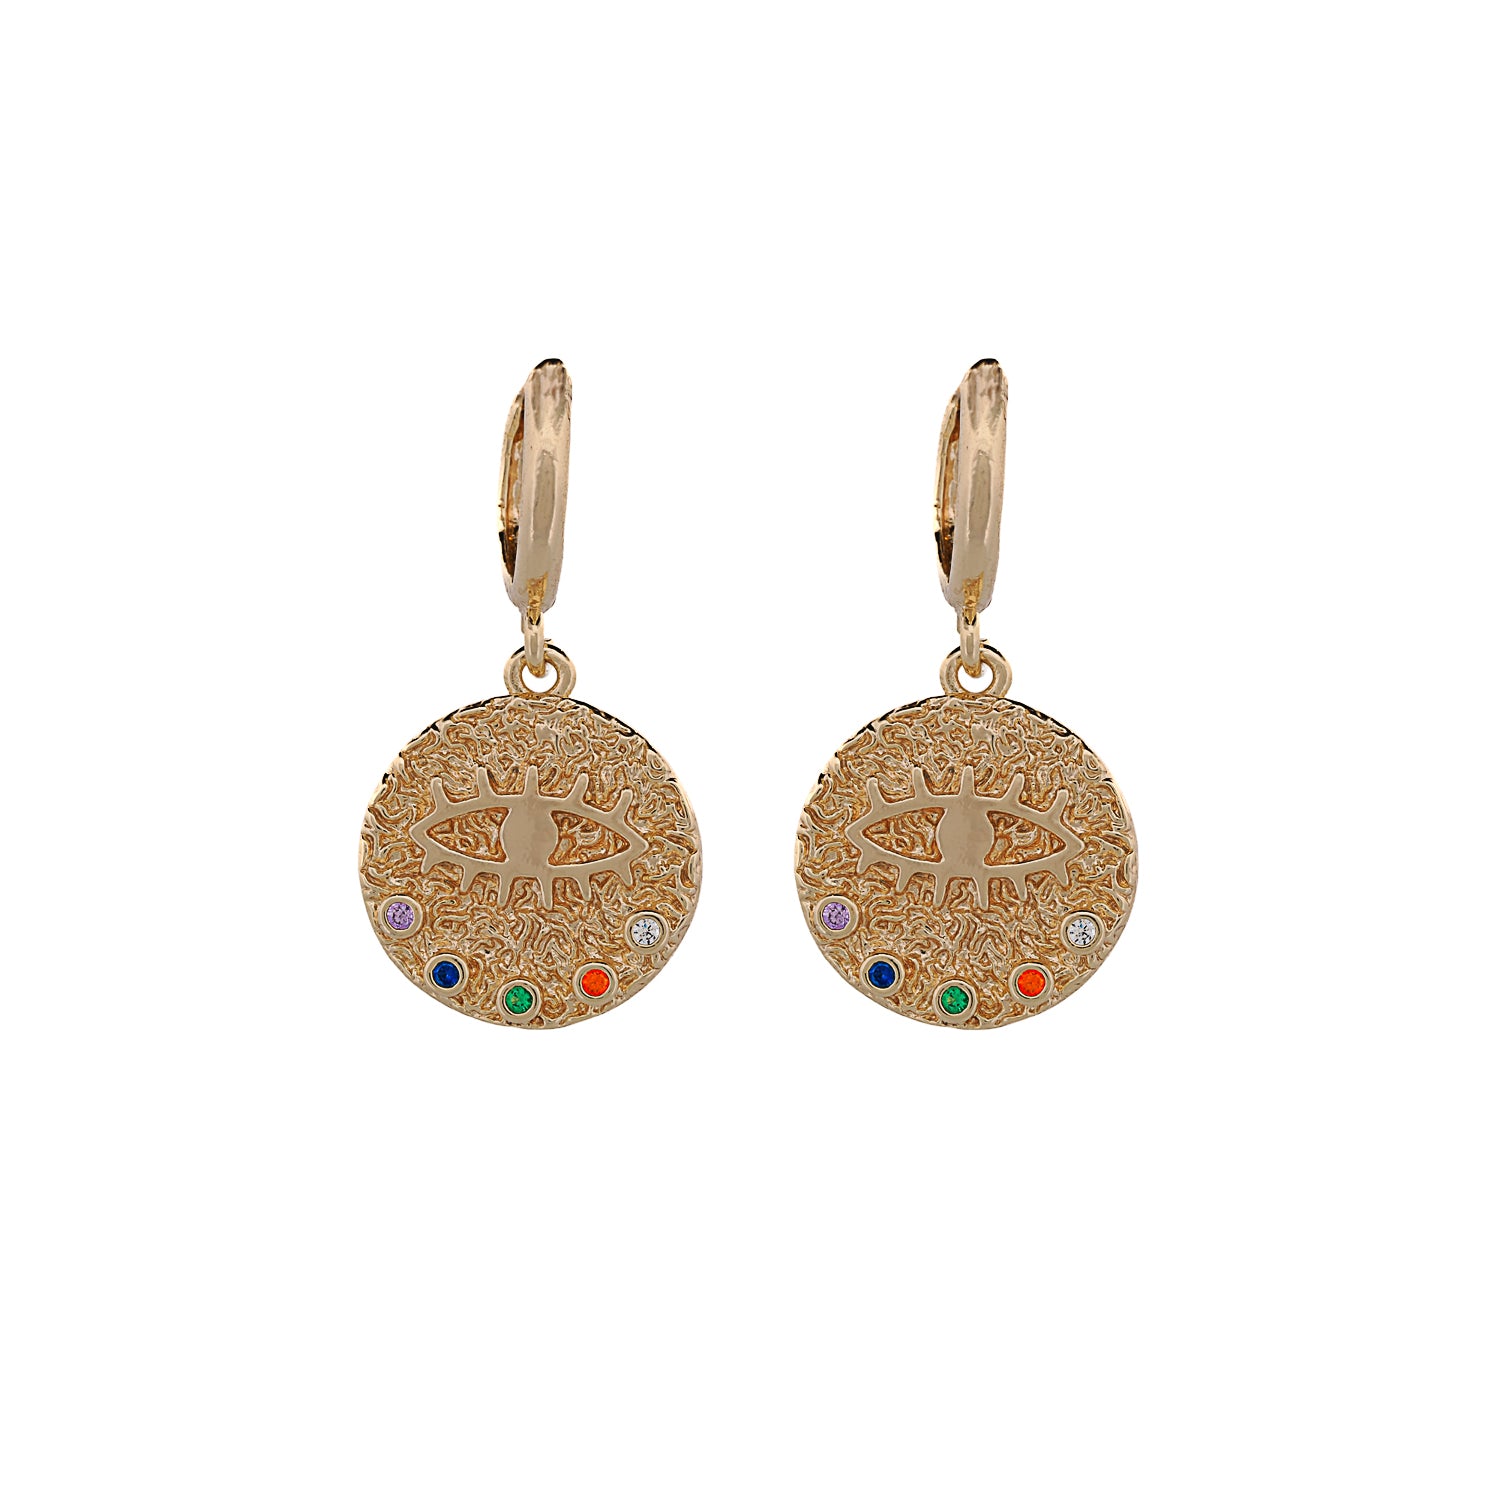 Multicolor Gemstone Evil Eye Earrings, handcrafted in the USA, a reflection of inner strength.